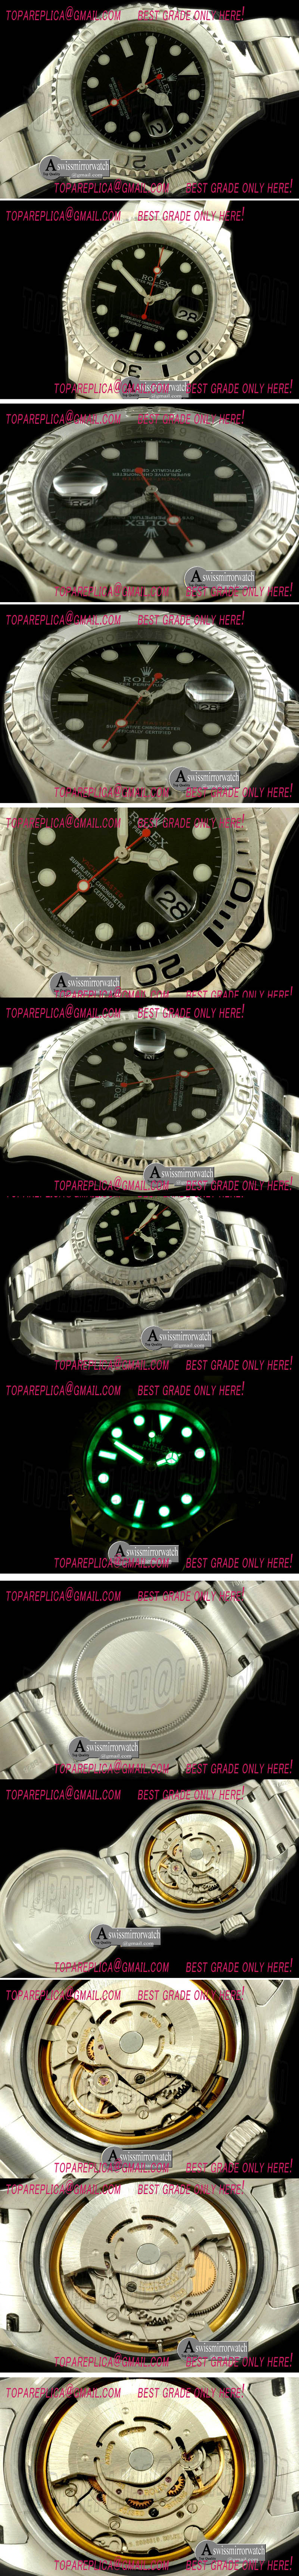 Replica Rolex Yachtmaster Watches